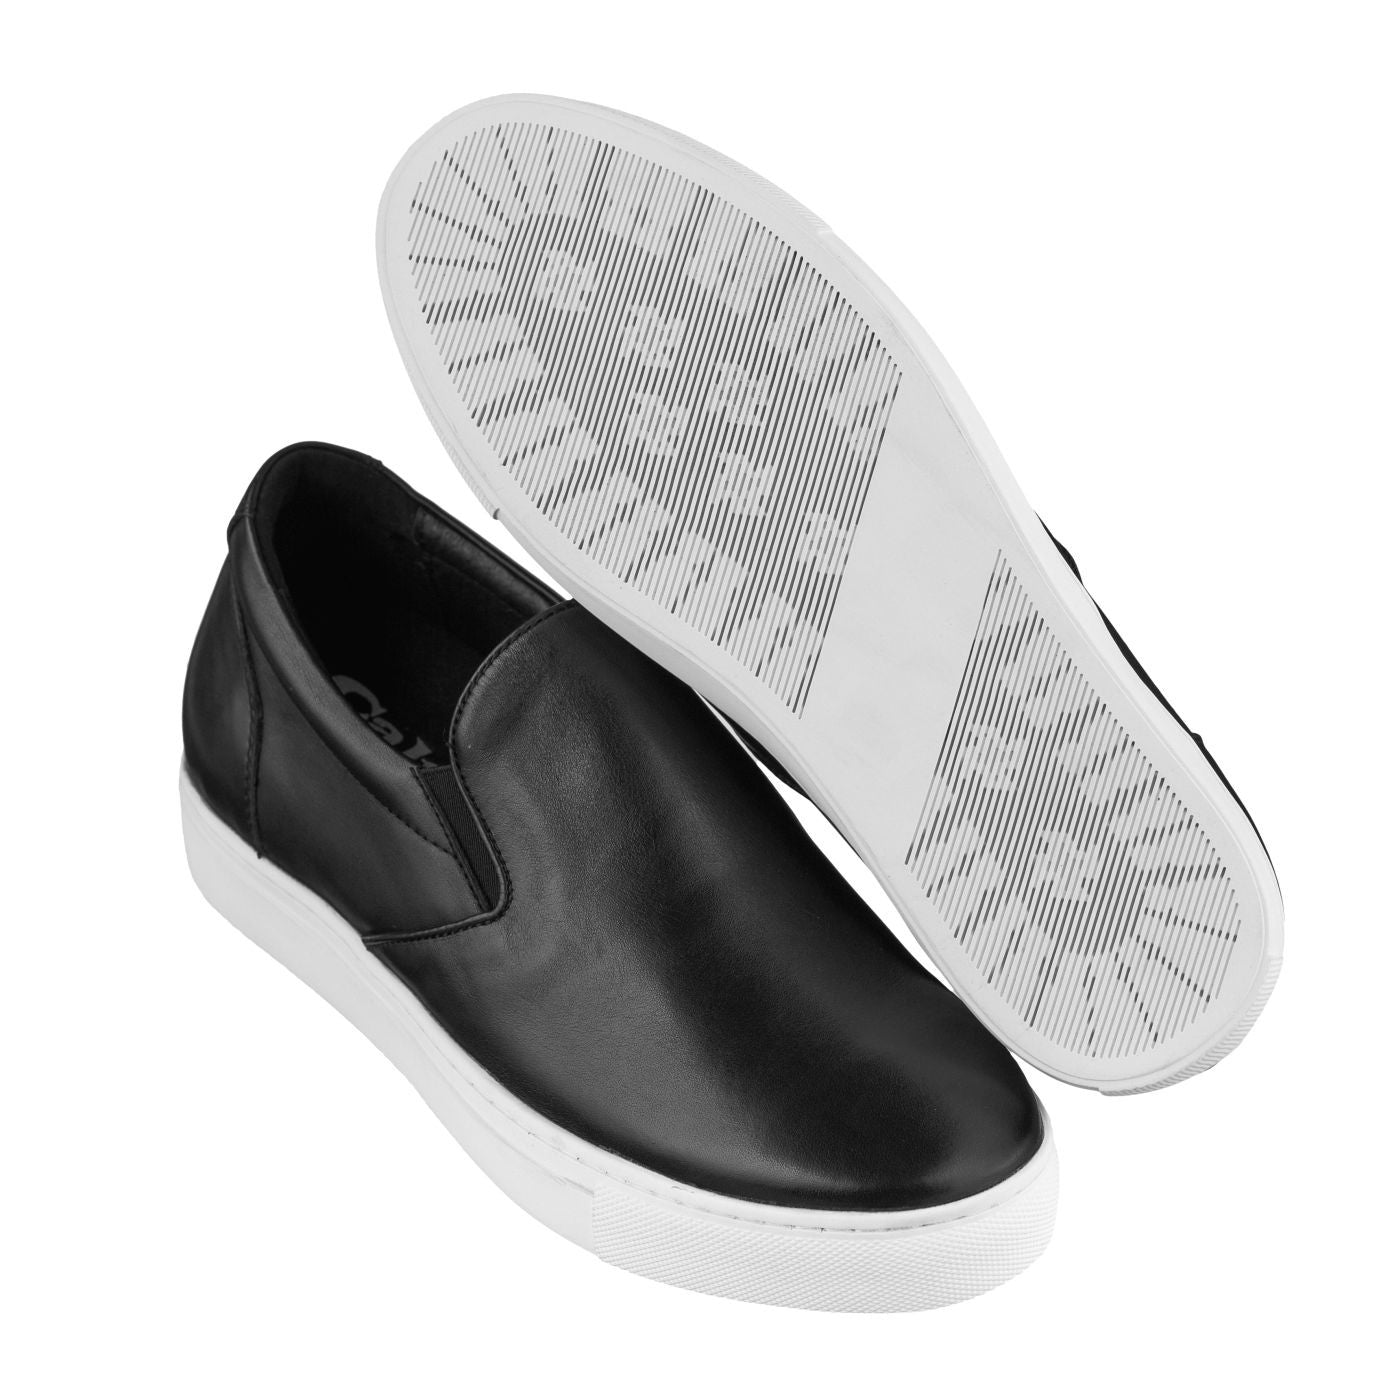 Elevator shoes height increase CALTO - T1021 - 2.4 Inches Taller (Black) Nappa Leather - Lightweight